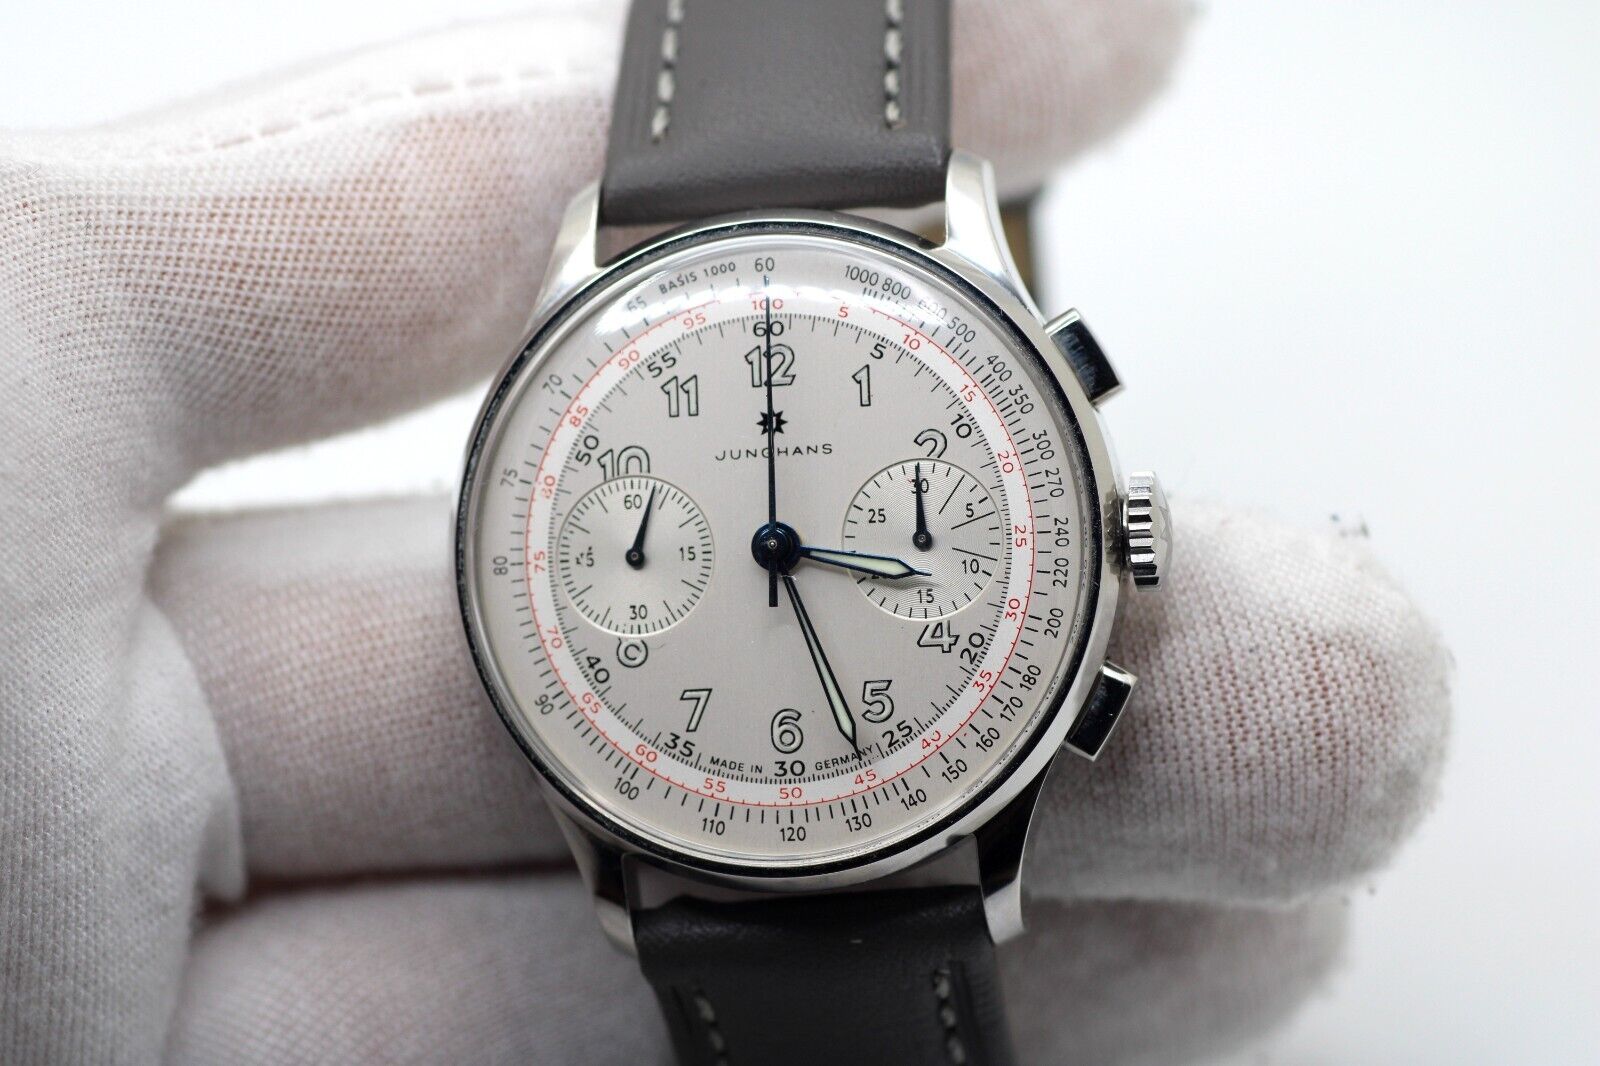 Junghans Chronograph 1951 - Limited Edition to 1861 - Box and Papers included